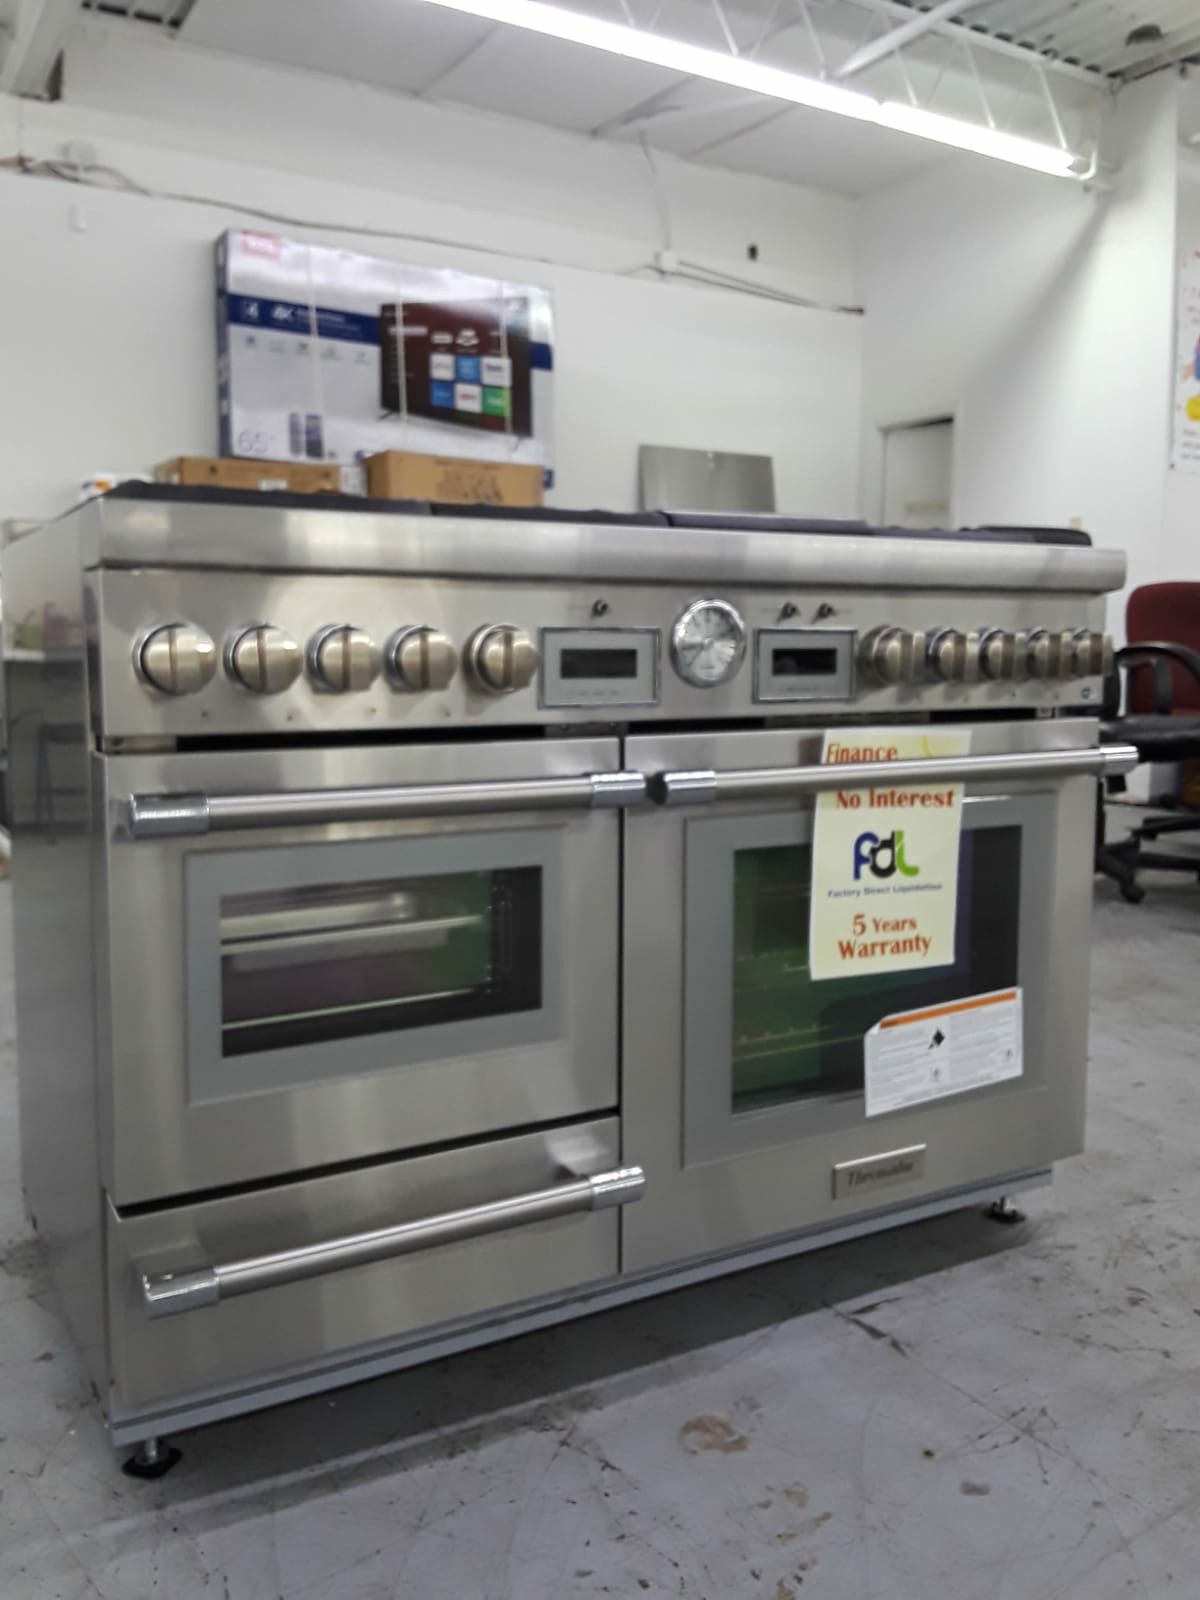 Big Sale! Thermador 48" inch Range. With 6 Gas Burners, 1 Electric Grilled, Warmer Drawer, Wi-Fi Connection, Steam Oven and Convection Oven